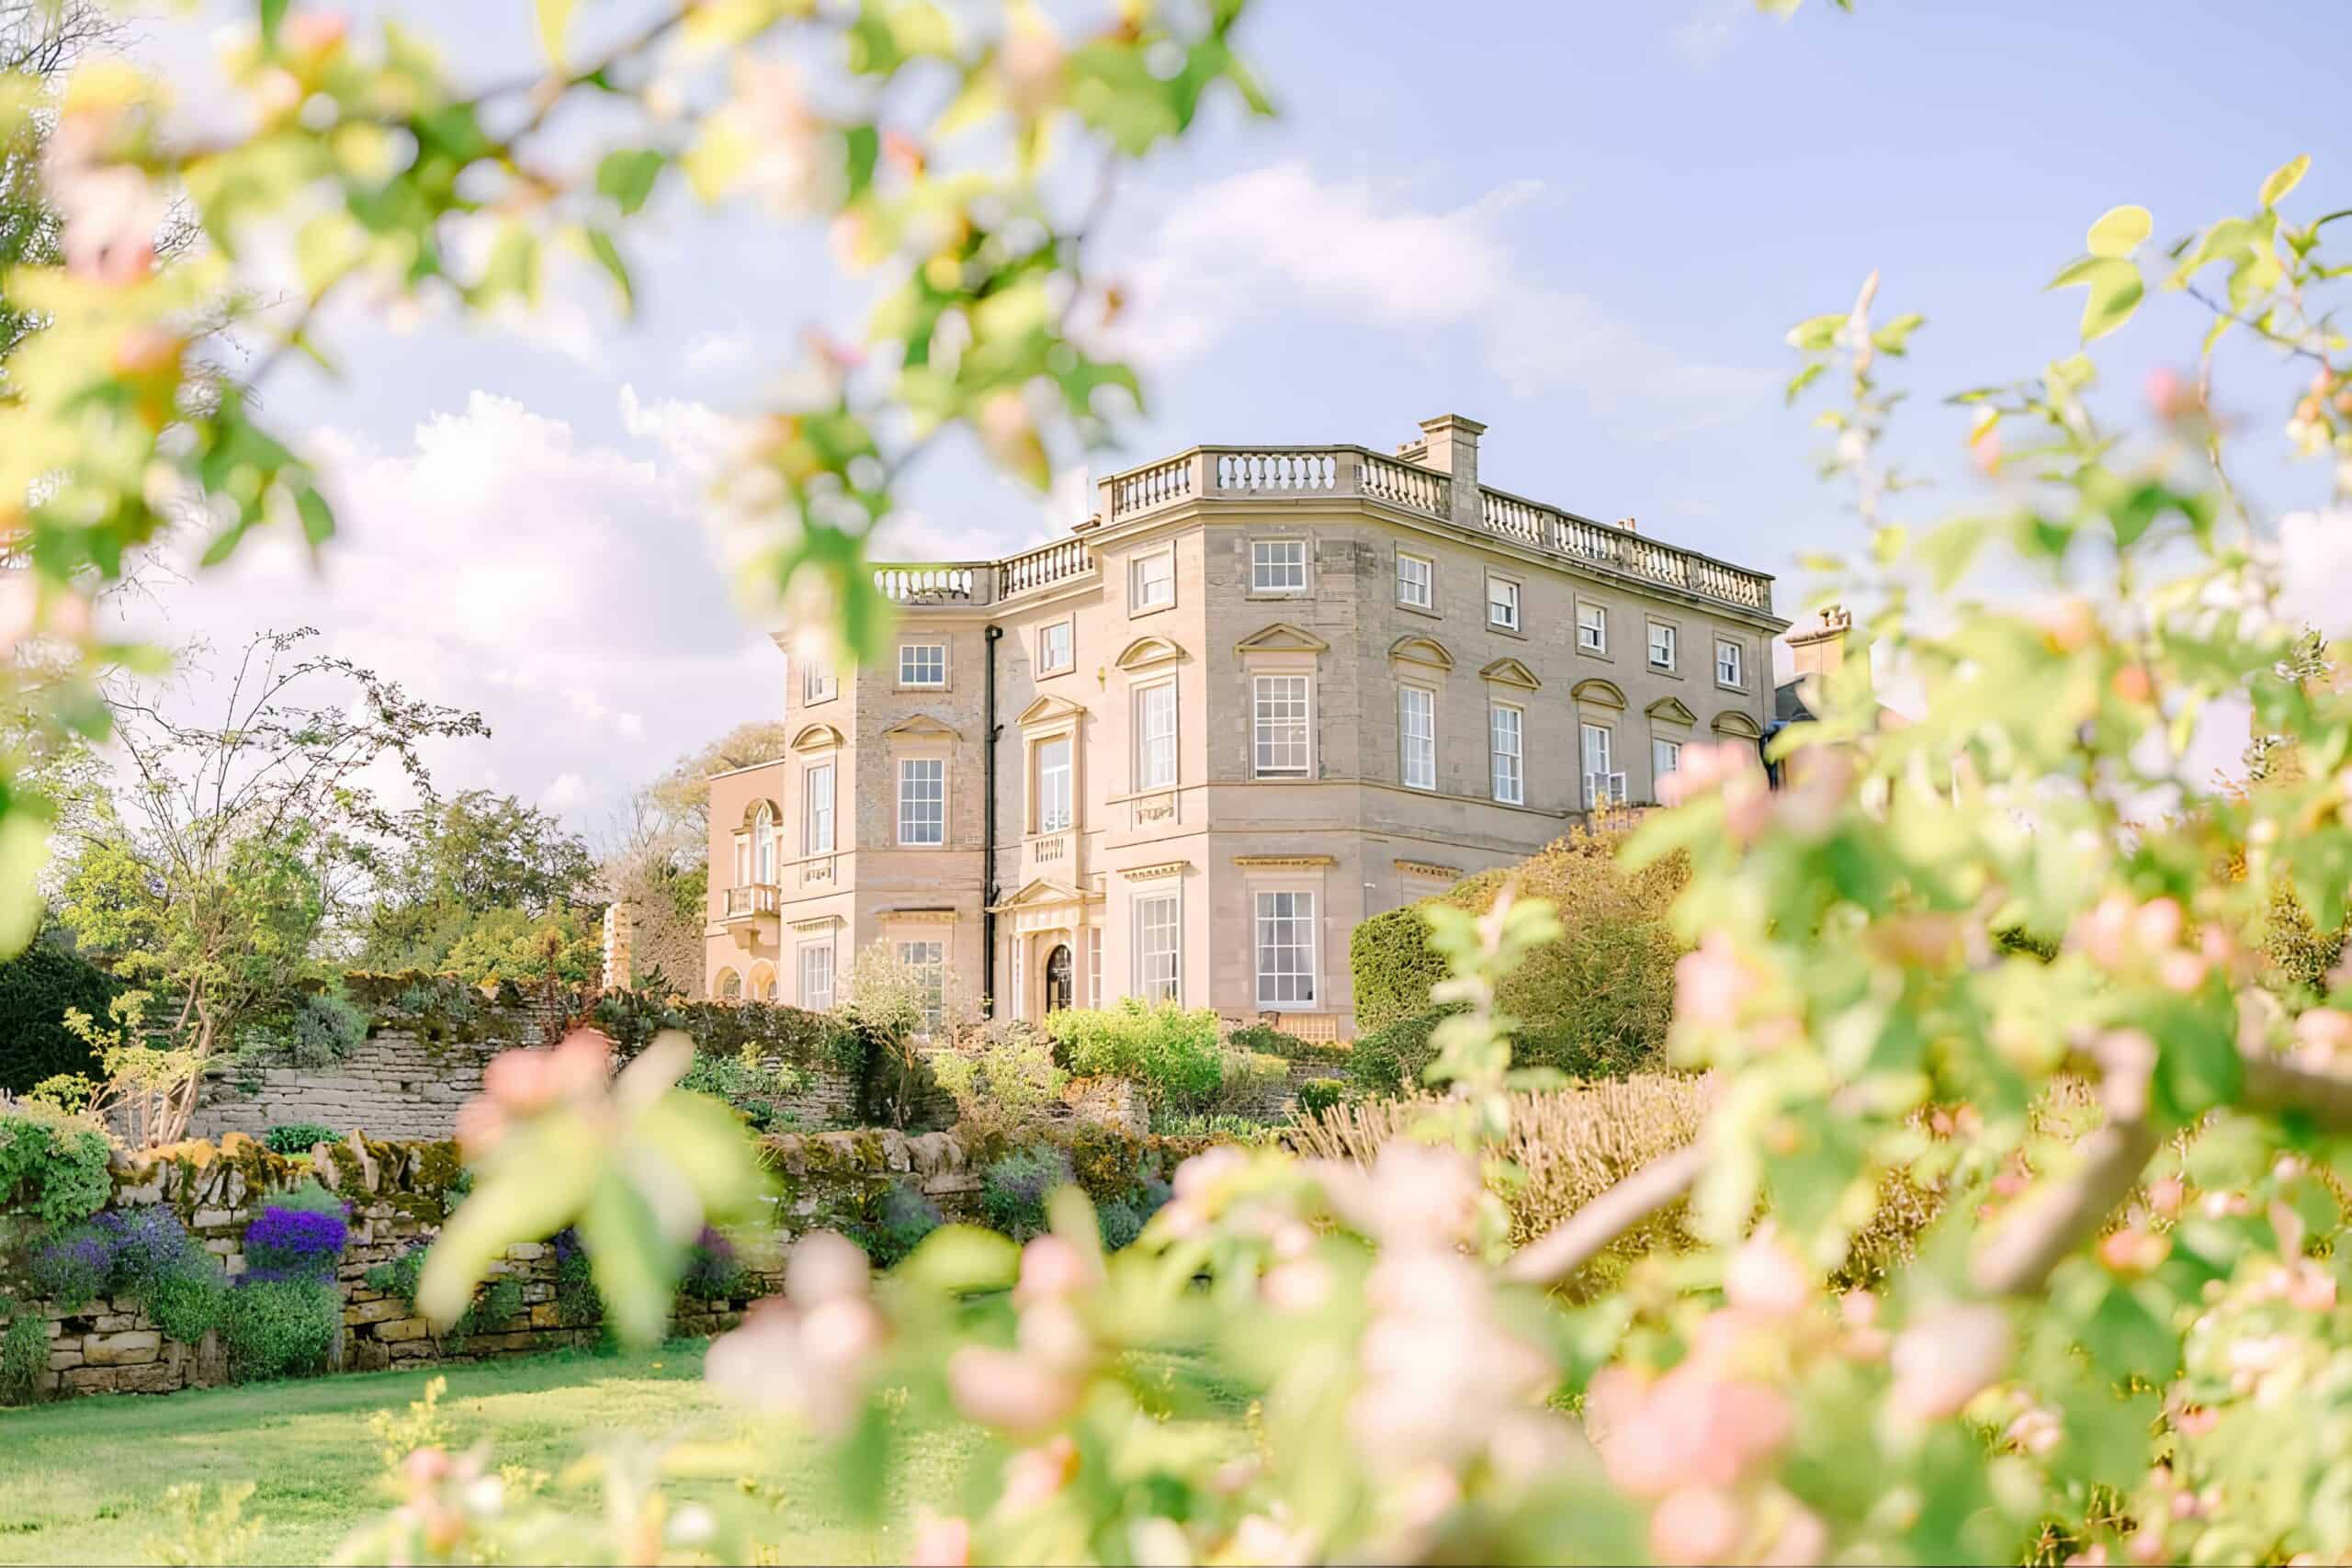 Our top tips for picking the perfect summer wedding venue.